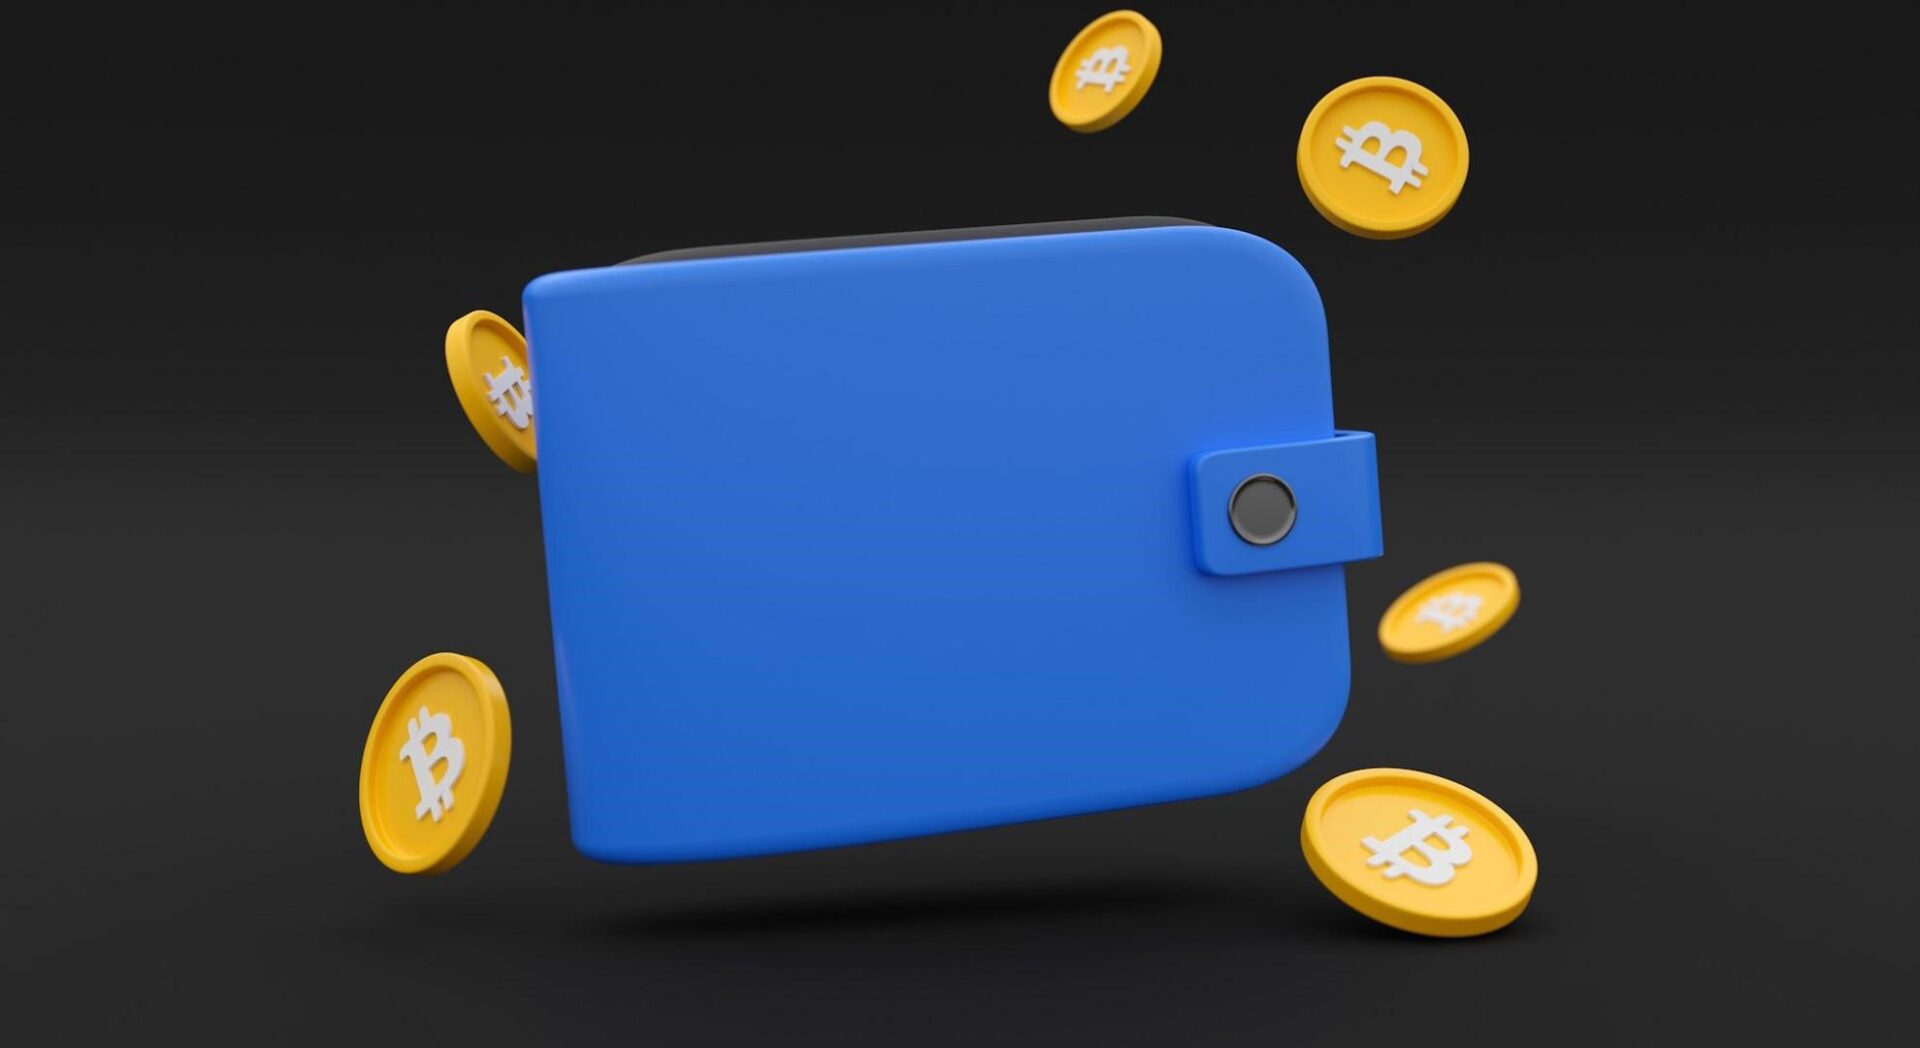 six coins with the bitcoin logo and a blue wallet